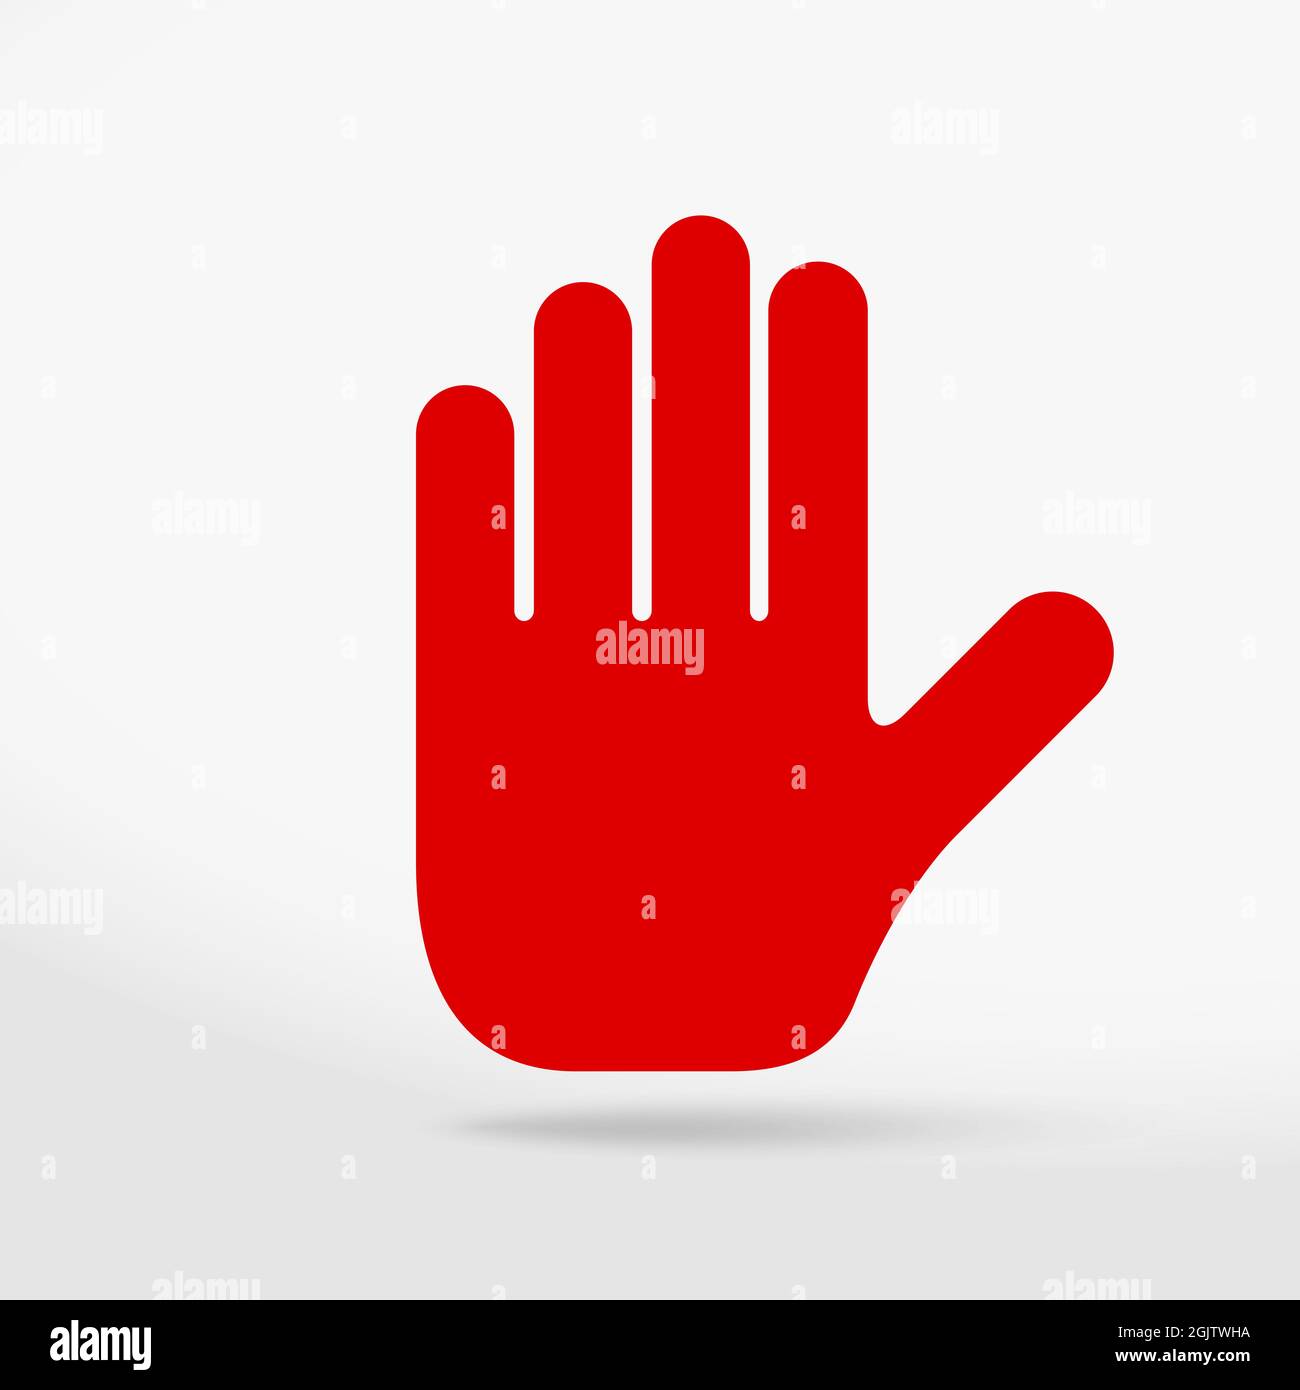 Red prohibition sign. Stop hand icon. No symbol, halt gesture, do not sign, nay, prohibited symbol, dont do it symbol isolated on white. illustration. Stock Photo